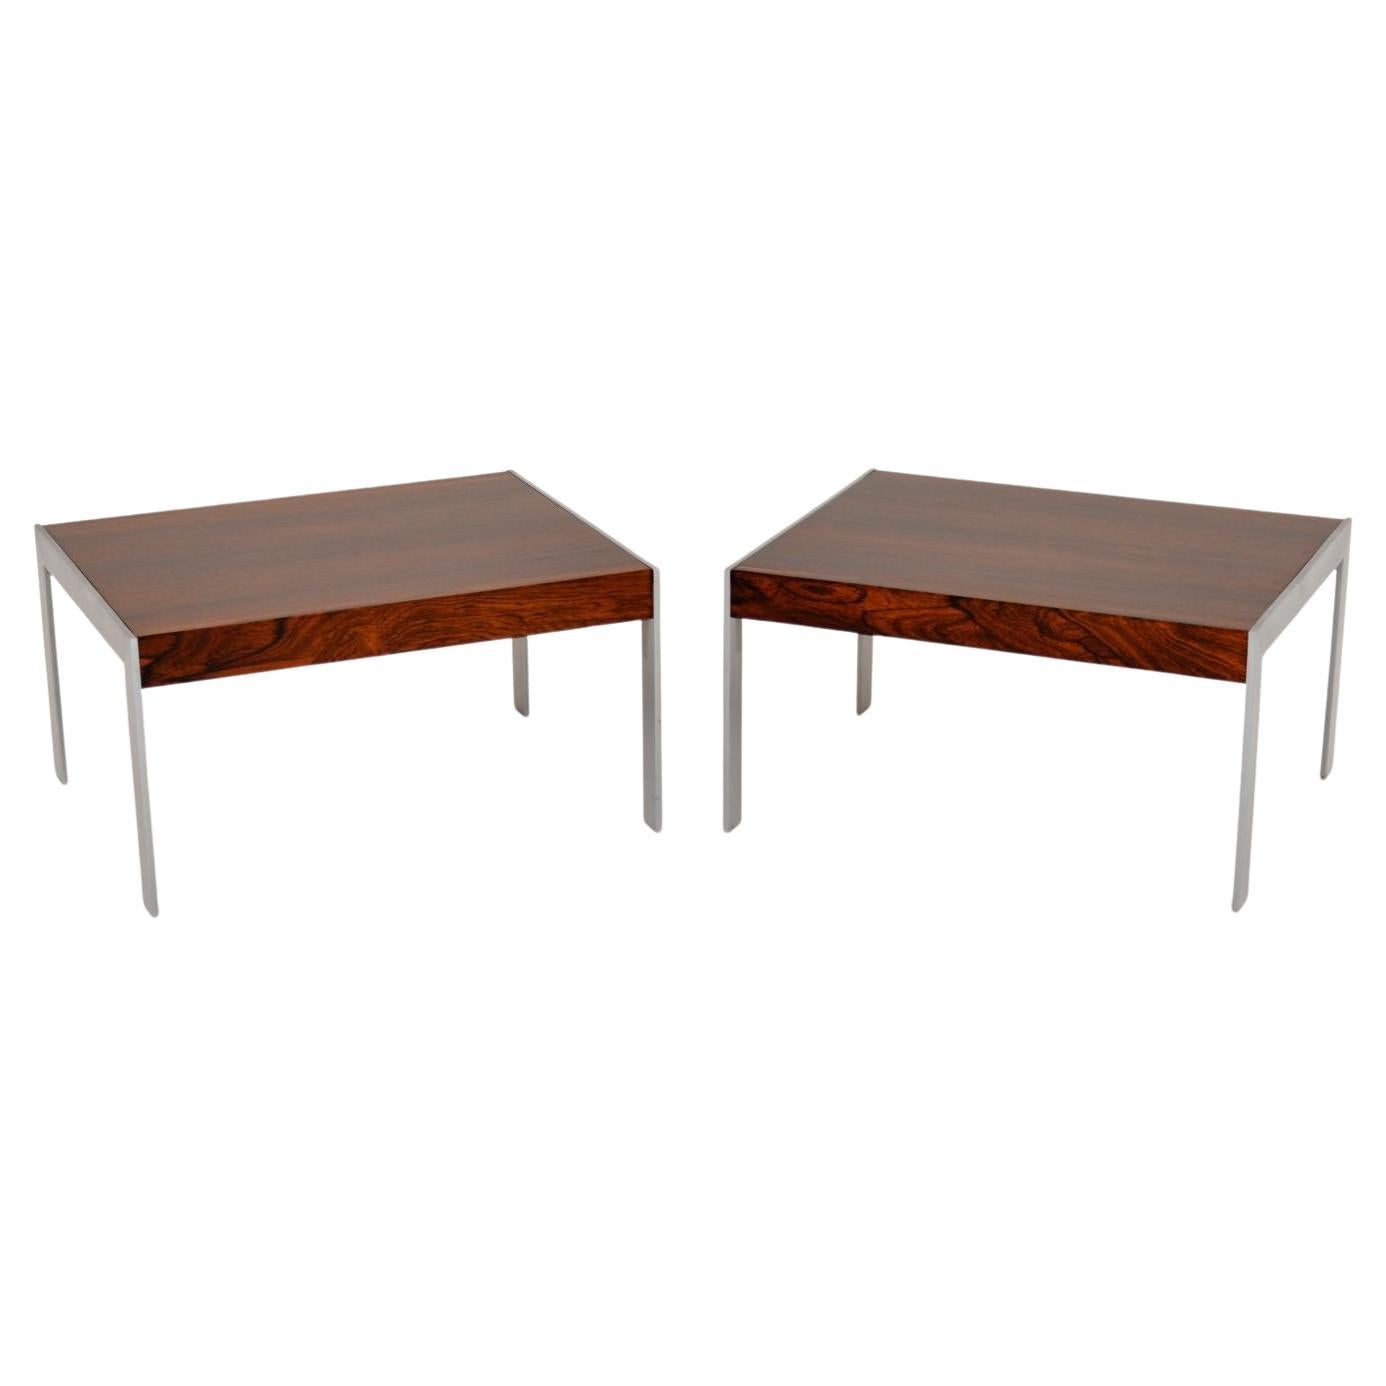 1970's Pair of Wood & Chrome Side Tables by Merrow Associates